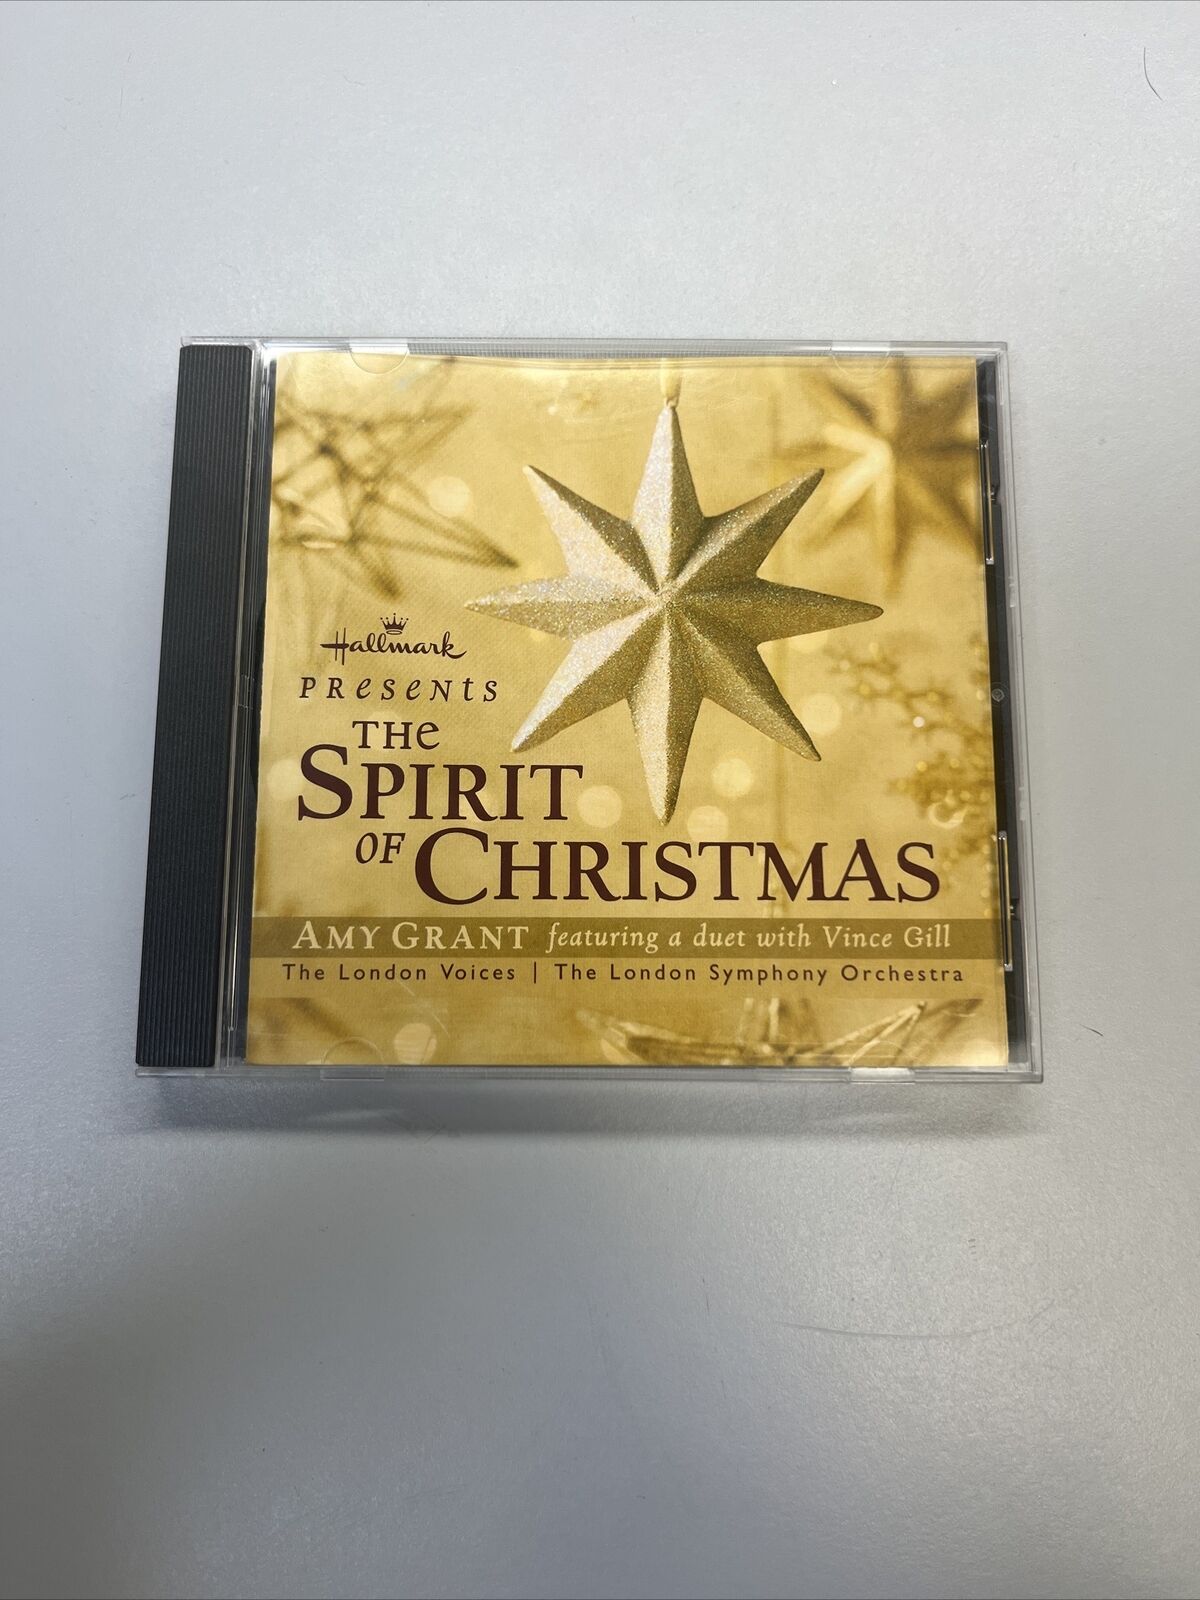 Hallmark Presents The Spirit of Christmas CD By Amy Grant with Vince Gill